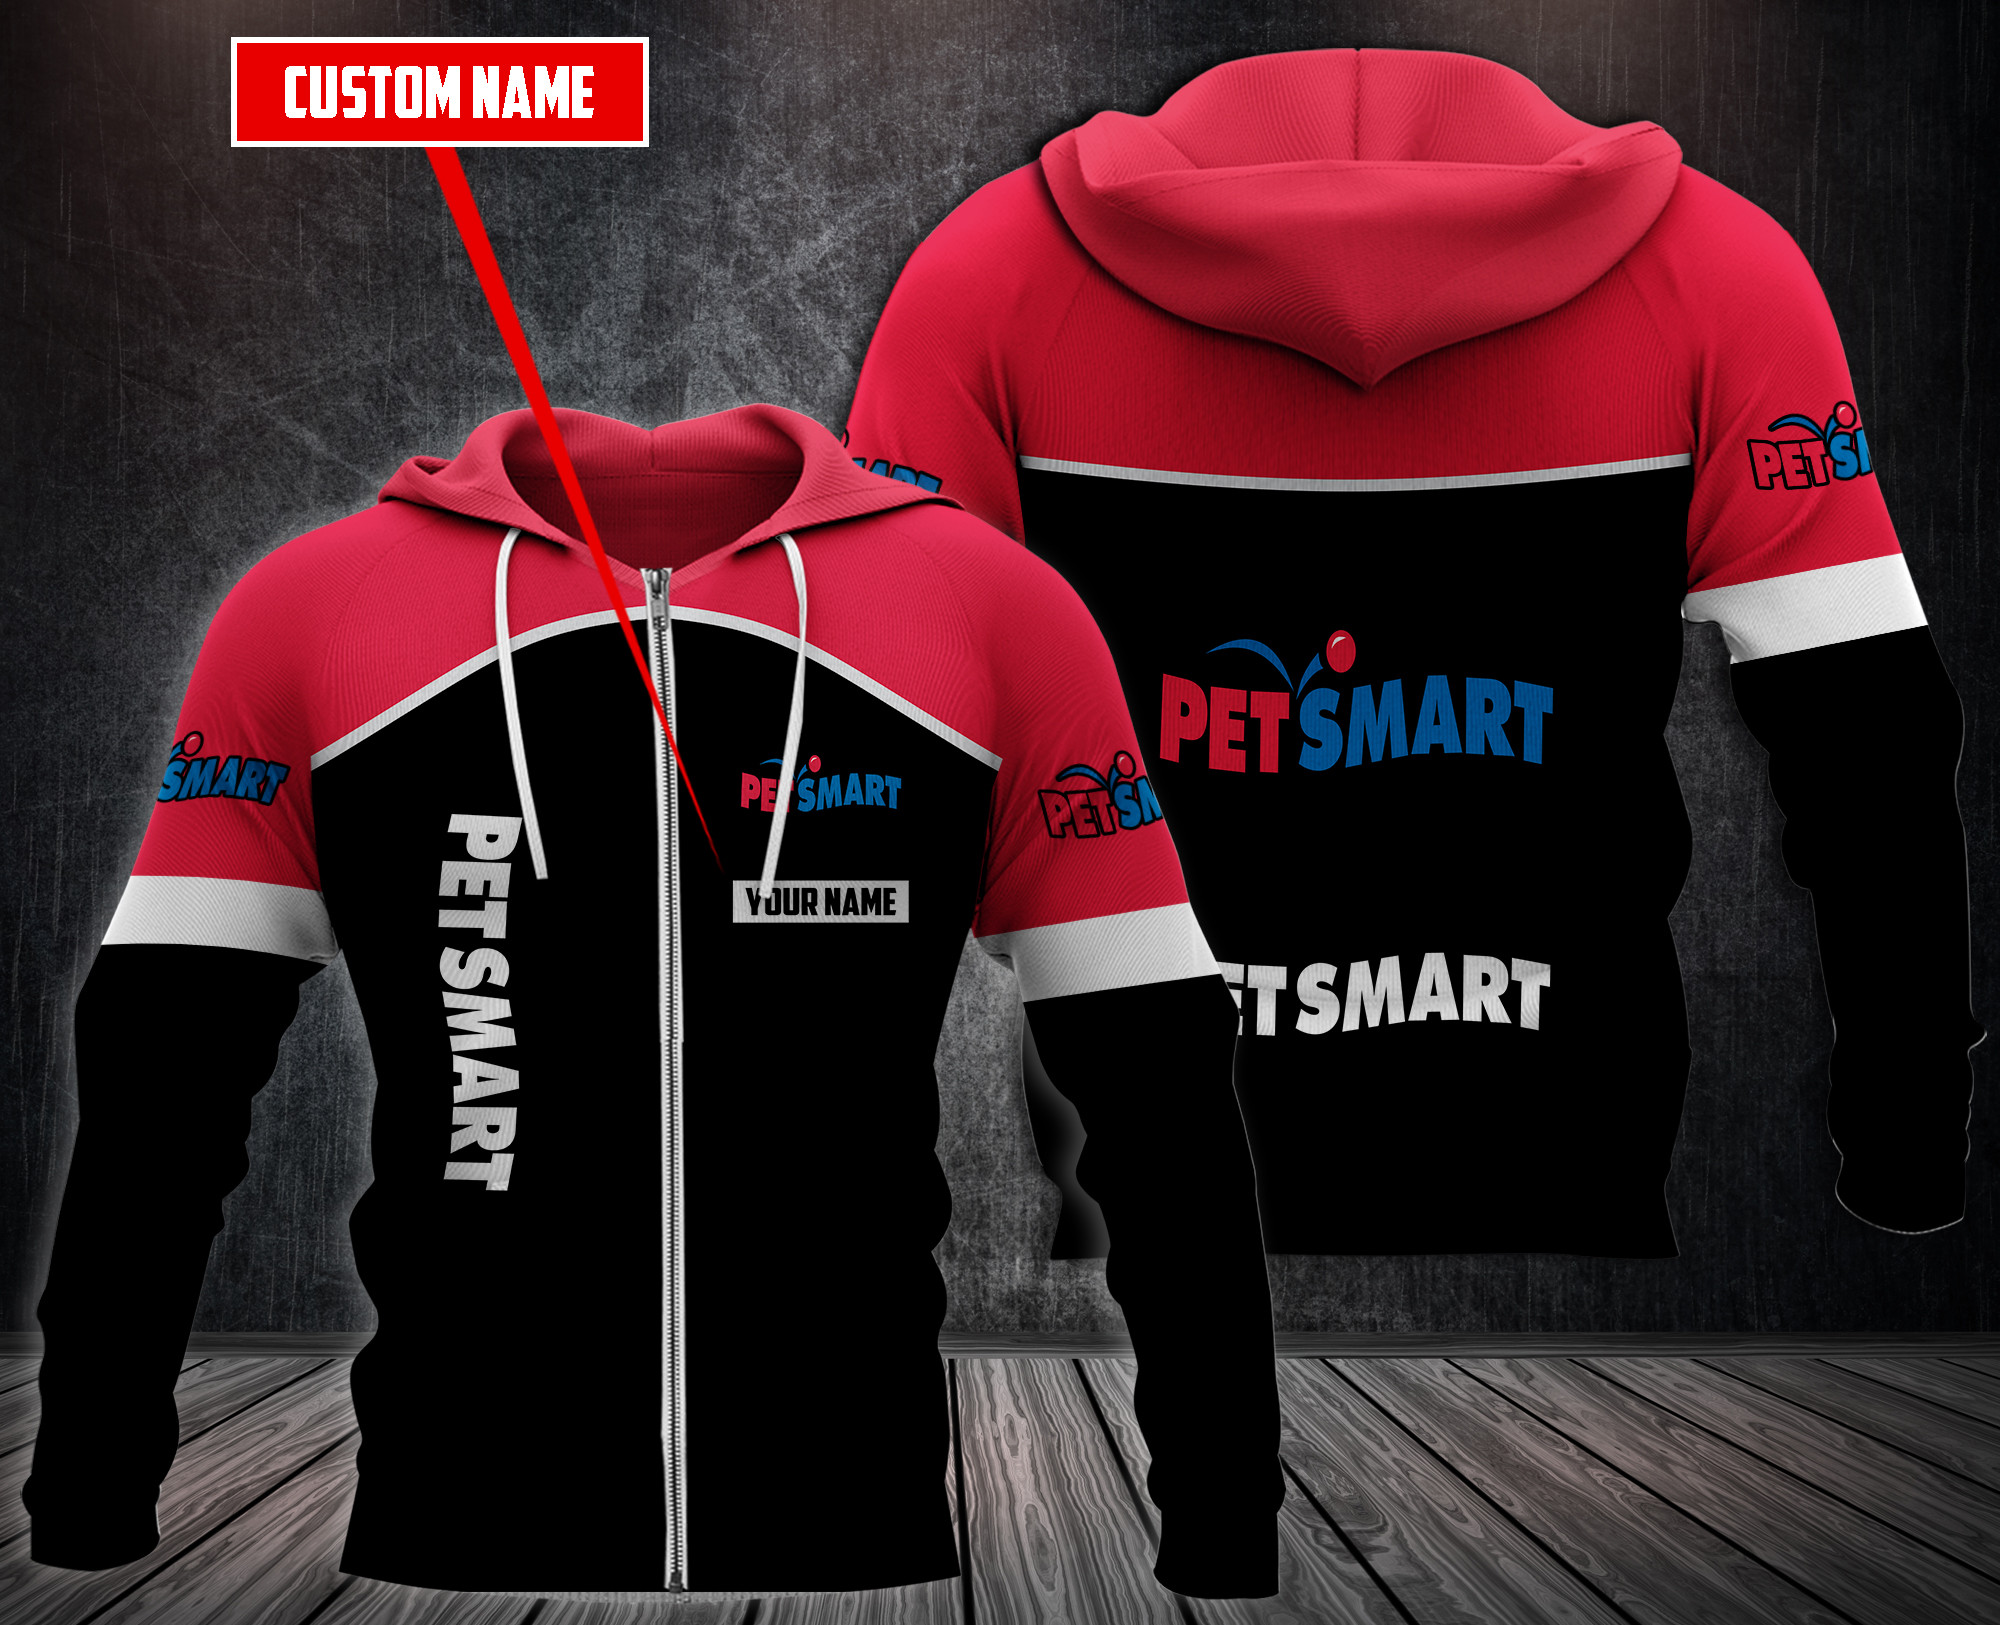 Choose the right hoodies for you on our boxboxshirt and ethershirt websites in 2022 118